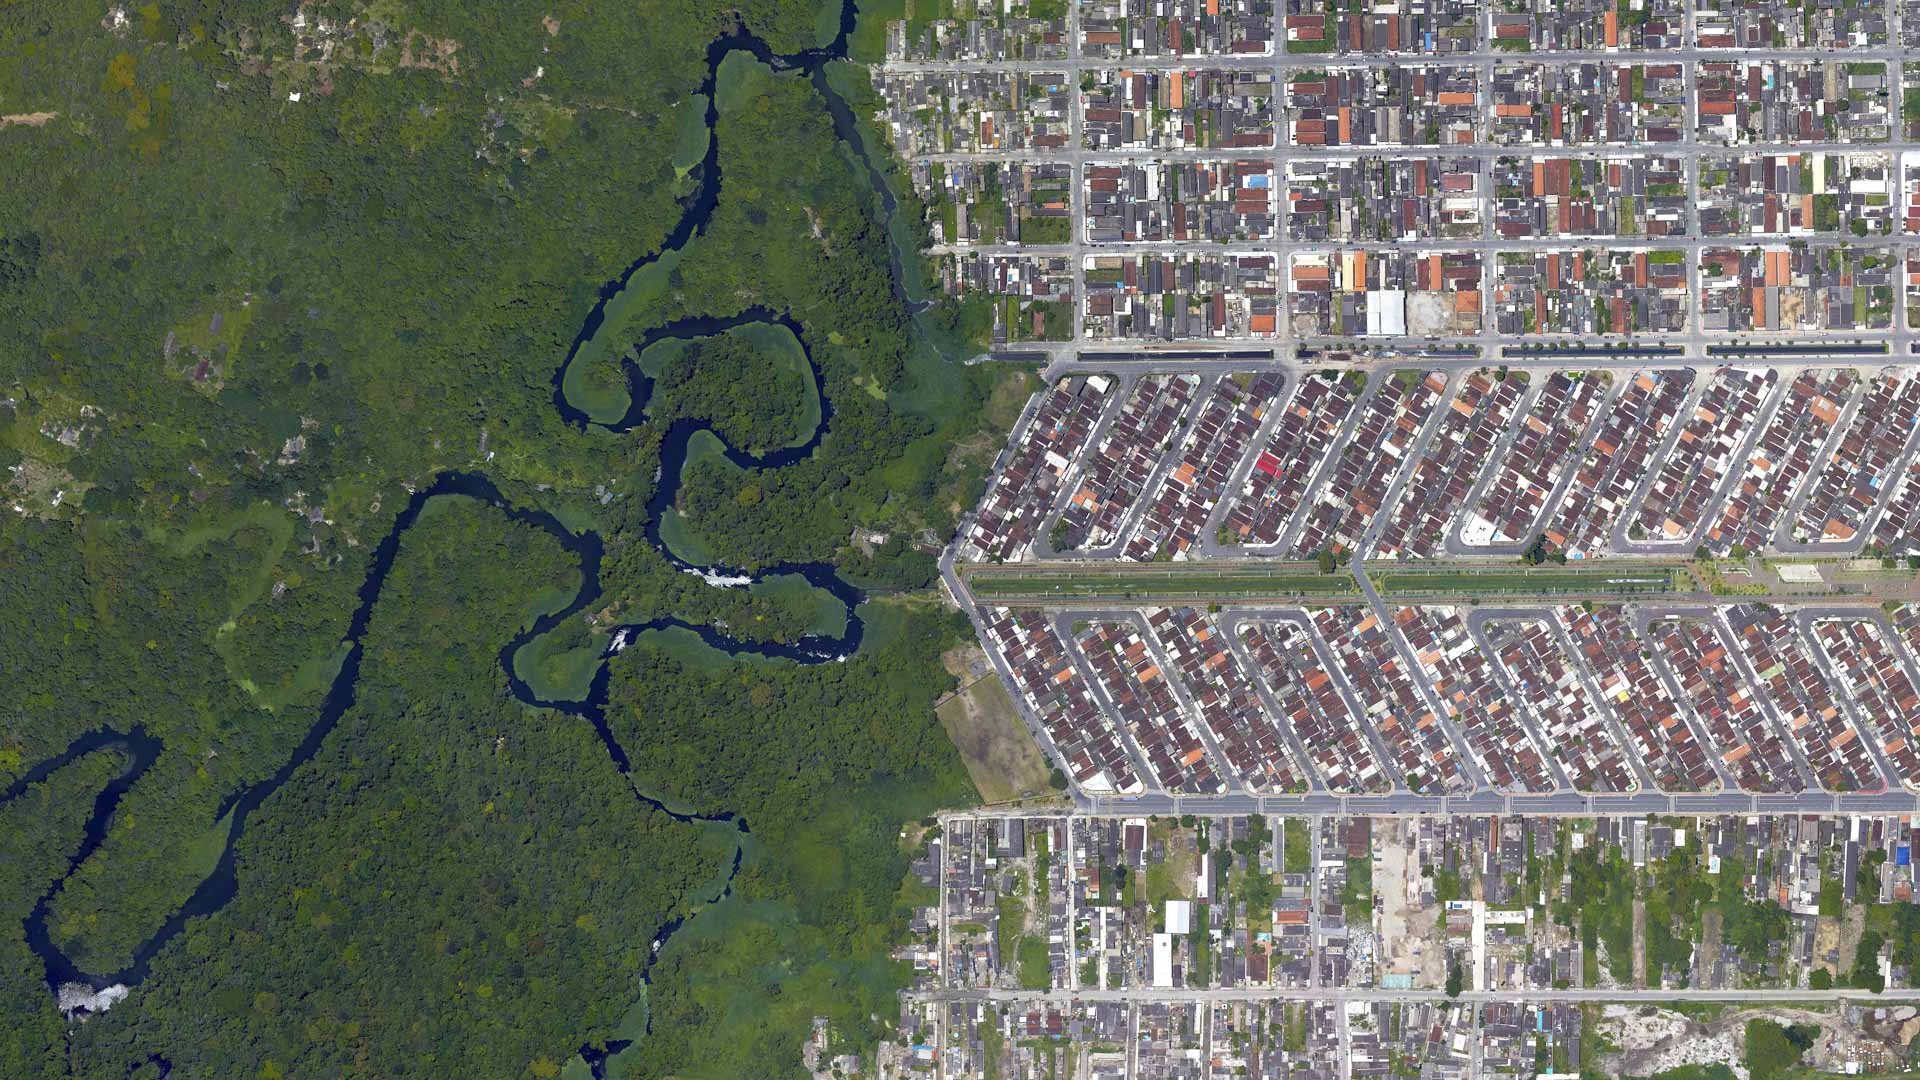 Forest, river and city border, forest and city separated by zigzag line, looking down aerial view from above – Bird’s eye view forest and city border Vila Caiçara, Praia Grande - Sao Paulo, Brazil